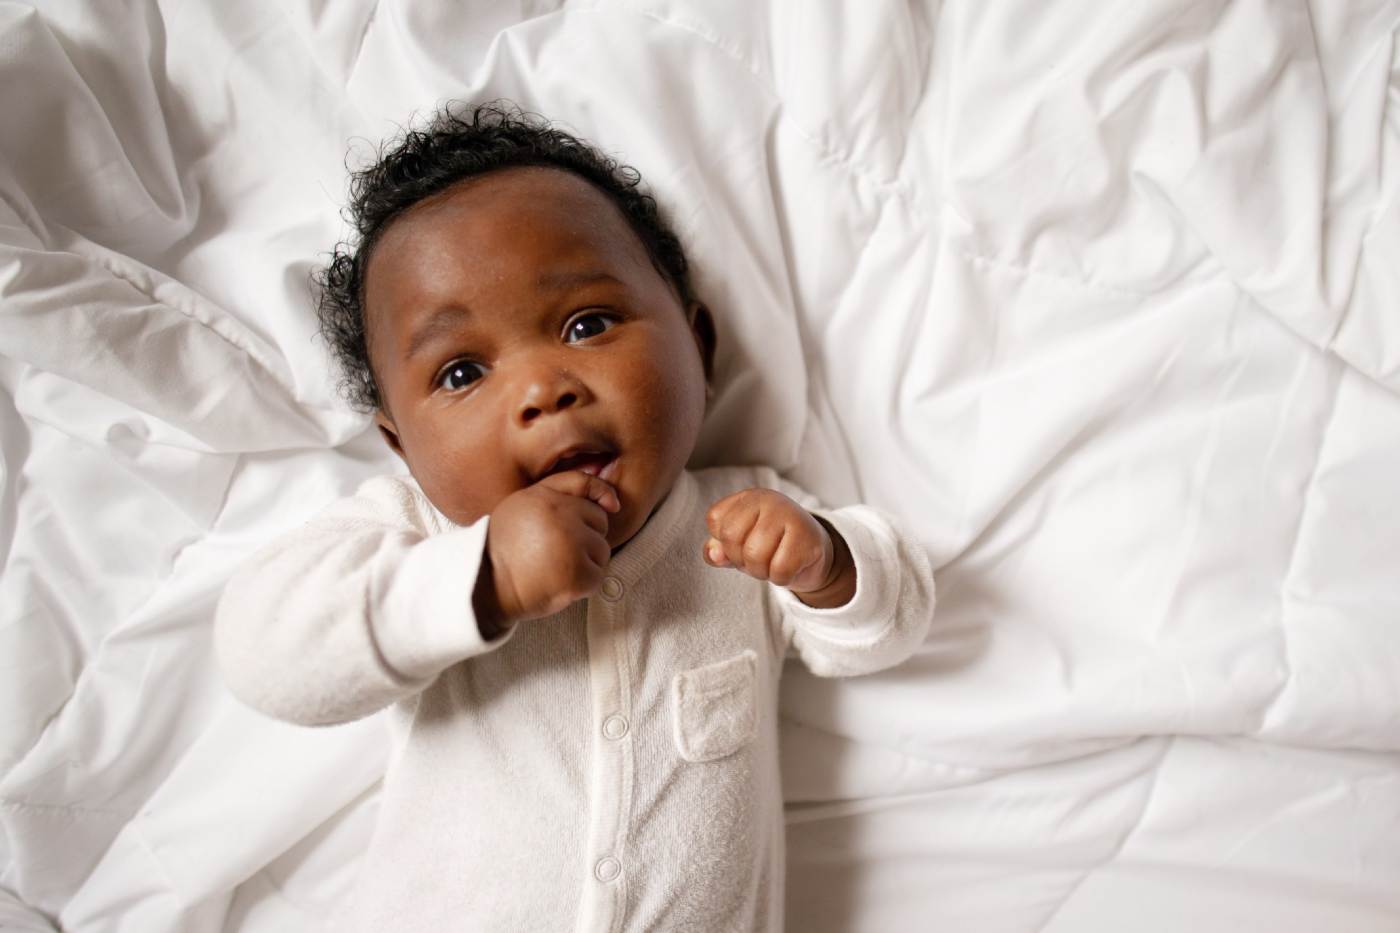 140 Boy and Girl Baby Names That Start With 'B' - PureWow